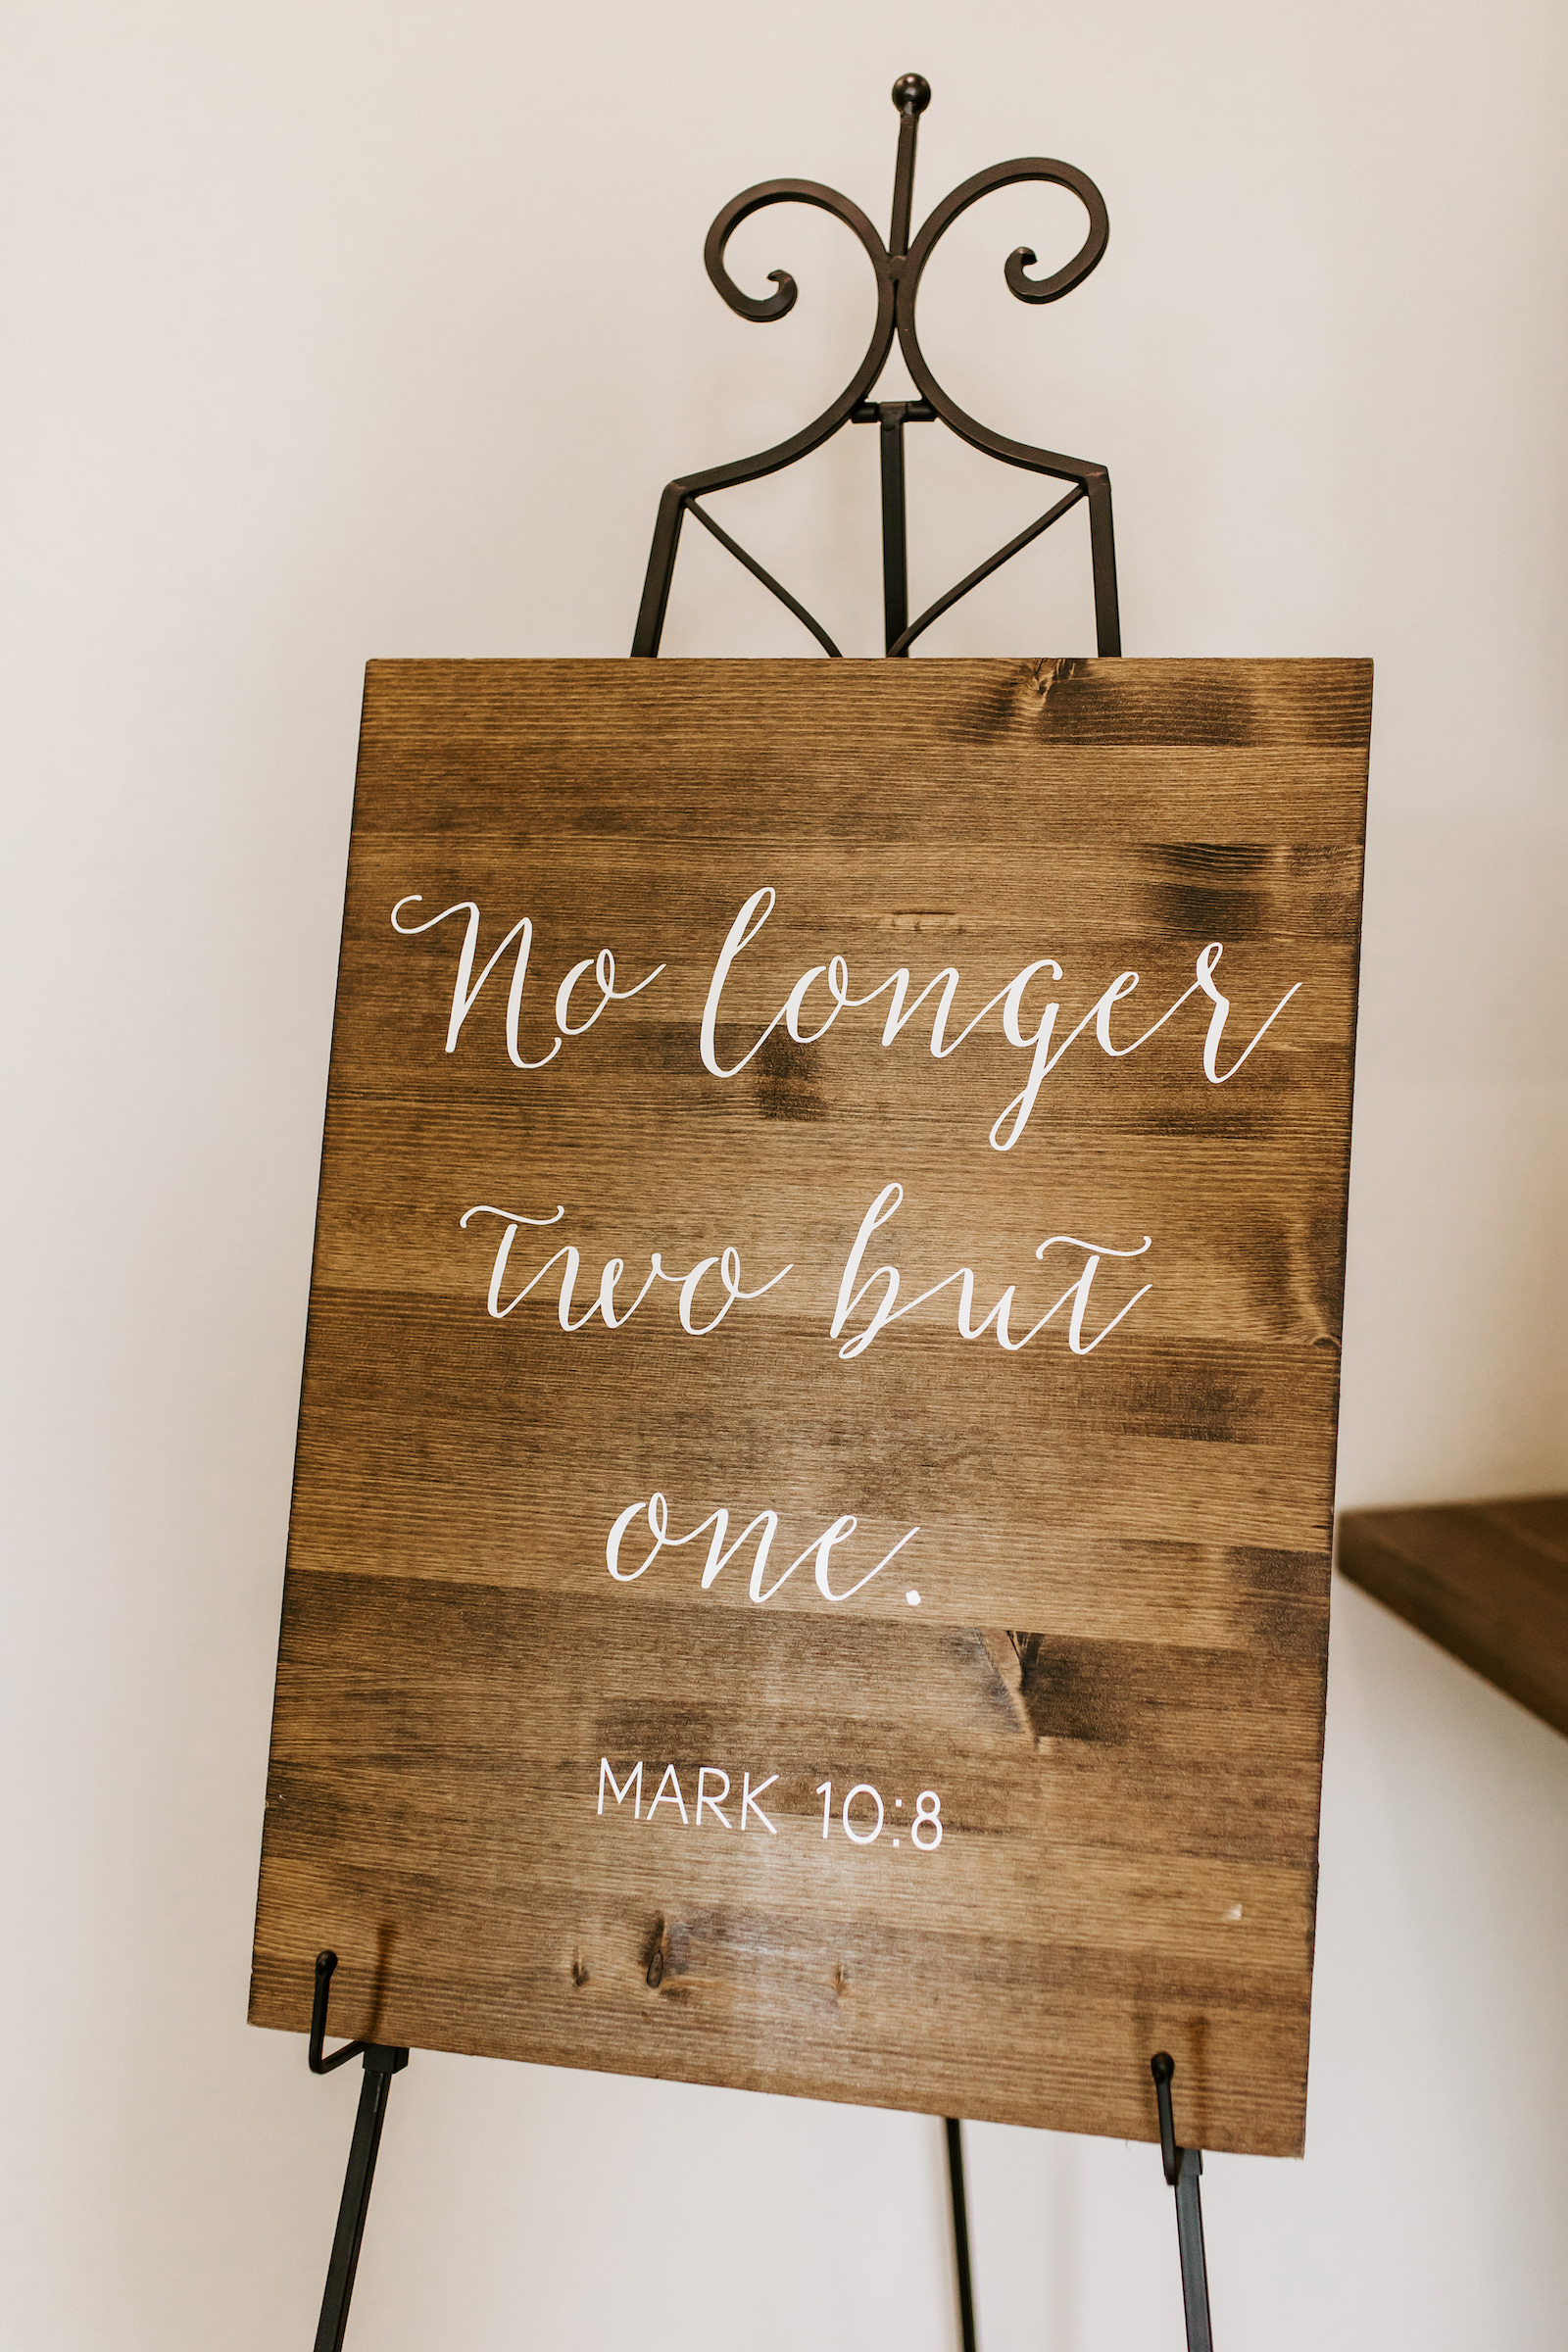 Wood Wedding Sign with Calligraphy Bible Verse March 10:8 "No Longer Two But One"